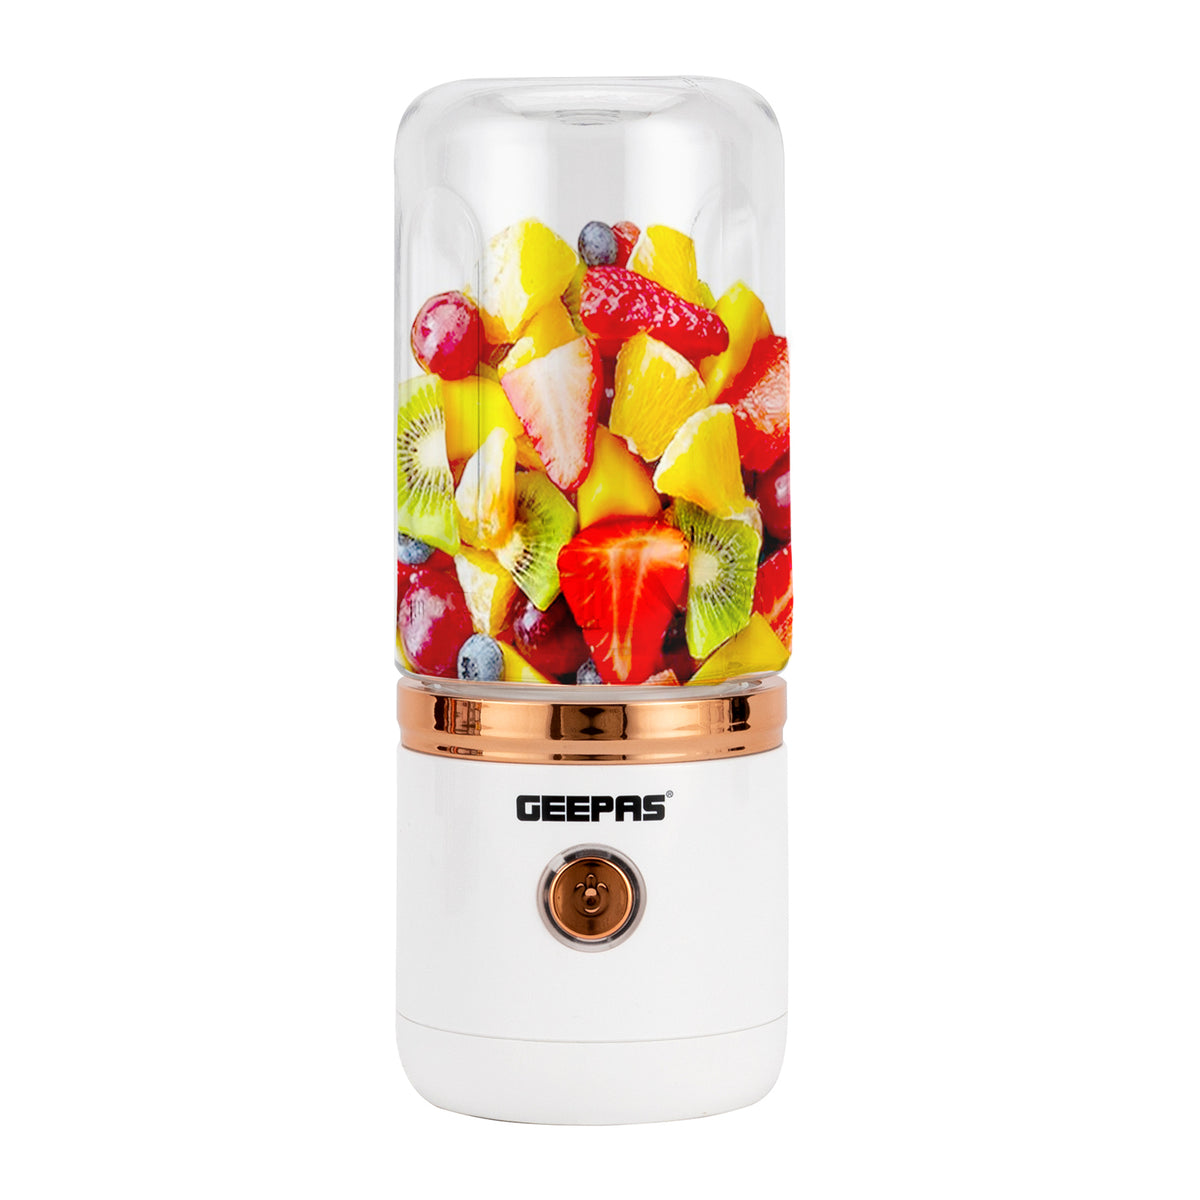 420ML Rechargeable Smoothie Maker & Mini Juicer